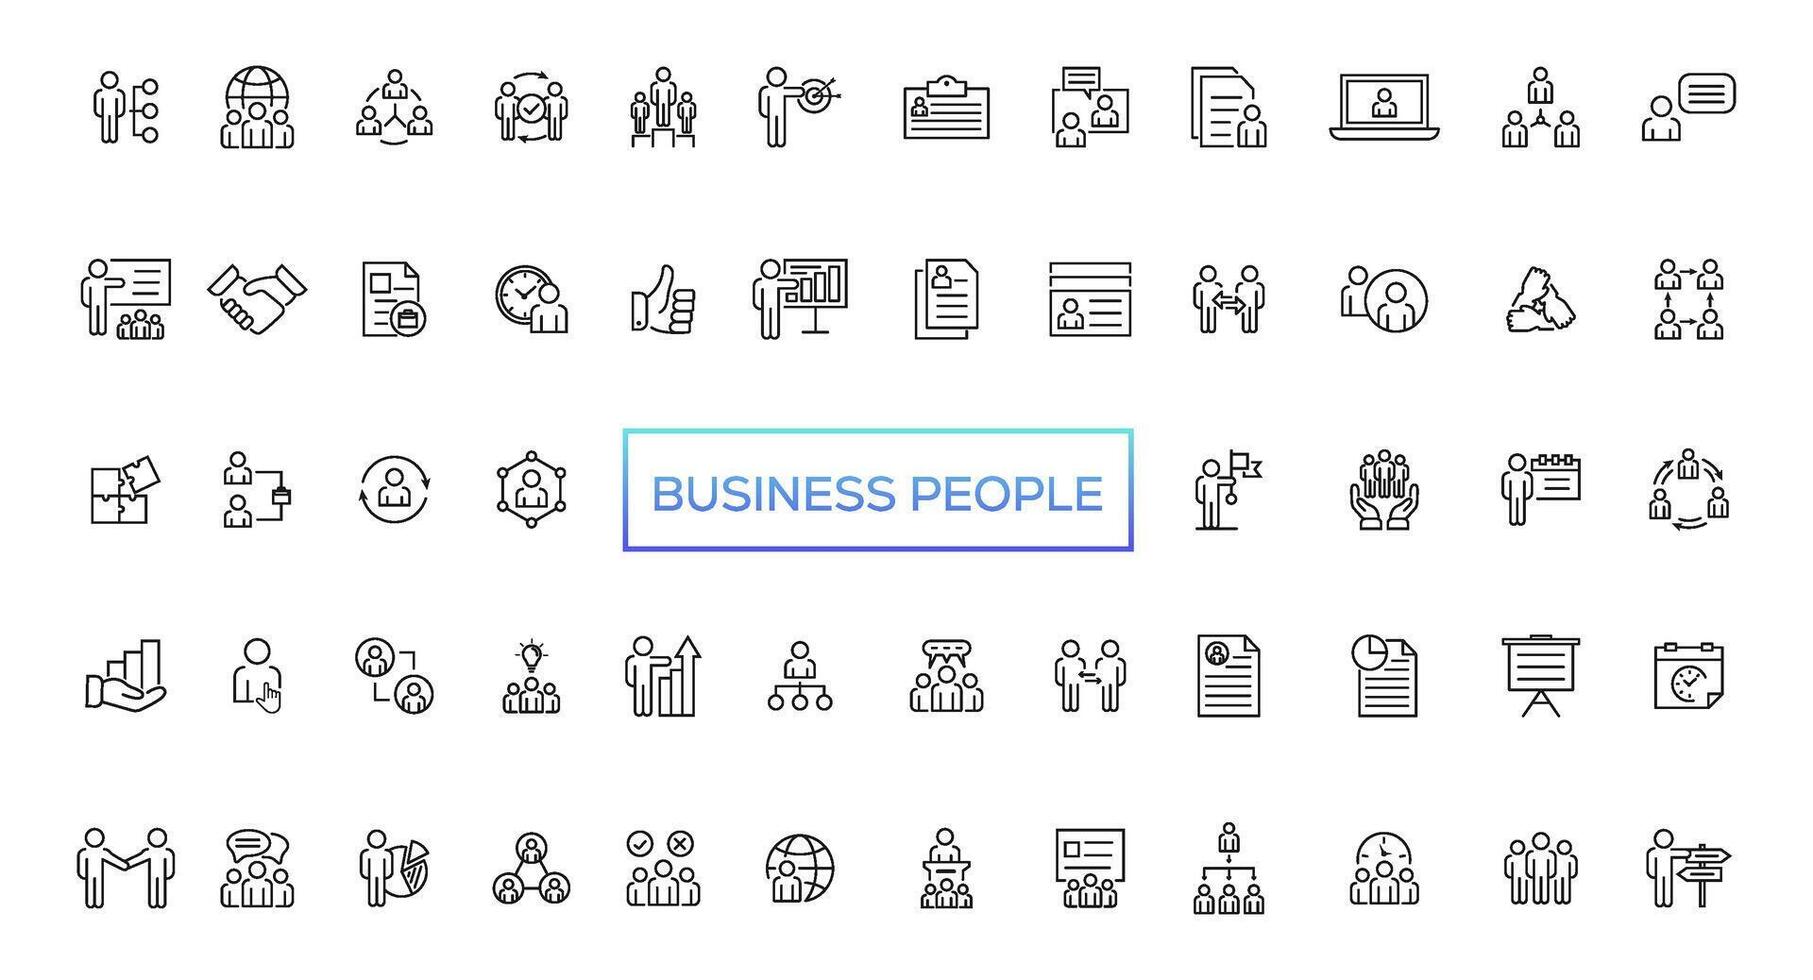 Business people line icons set. Businessman outline icons collection. Teamwork, human resources, meeting, partnership, meeting, work group, success, resume vector